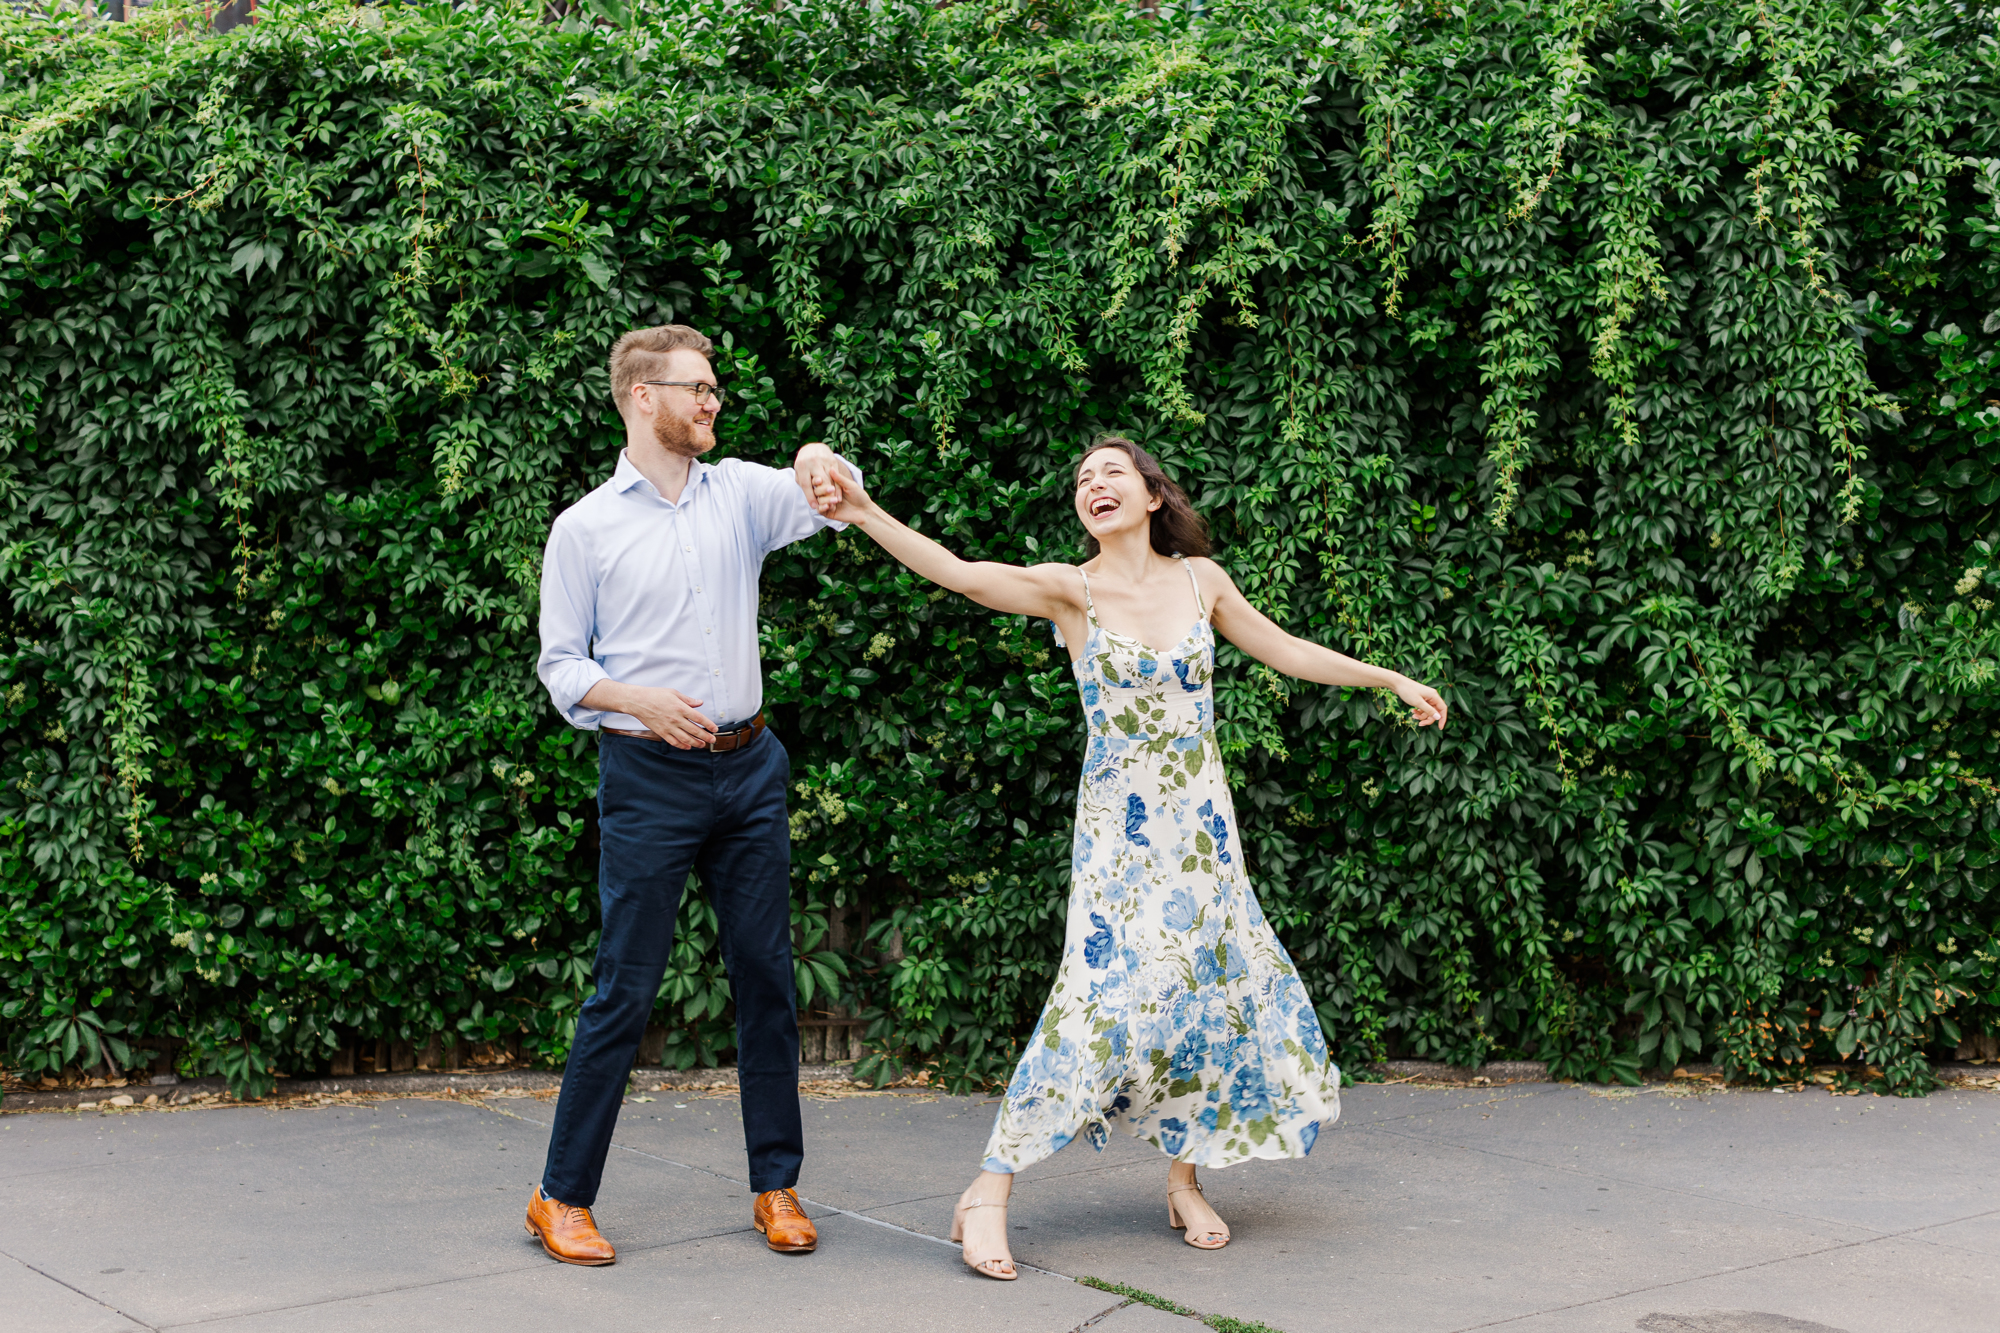 Jaw-Dropping Engagement Photos in Brooklyn Heights